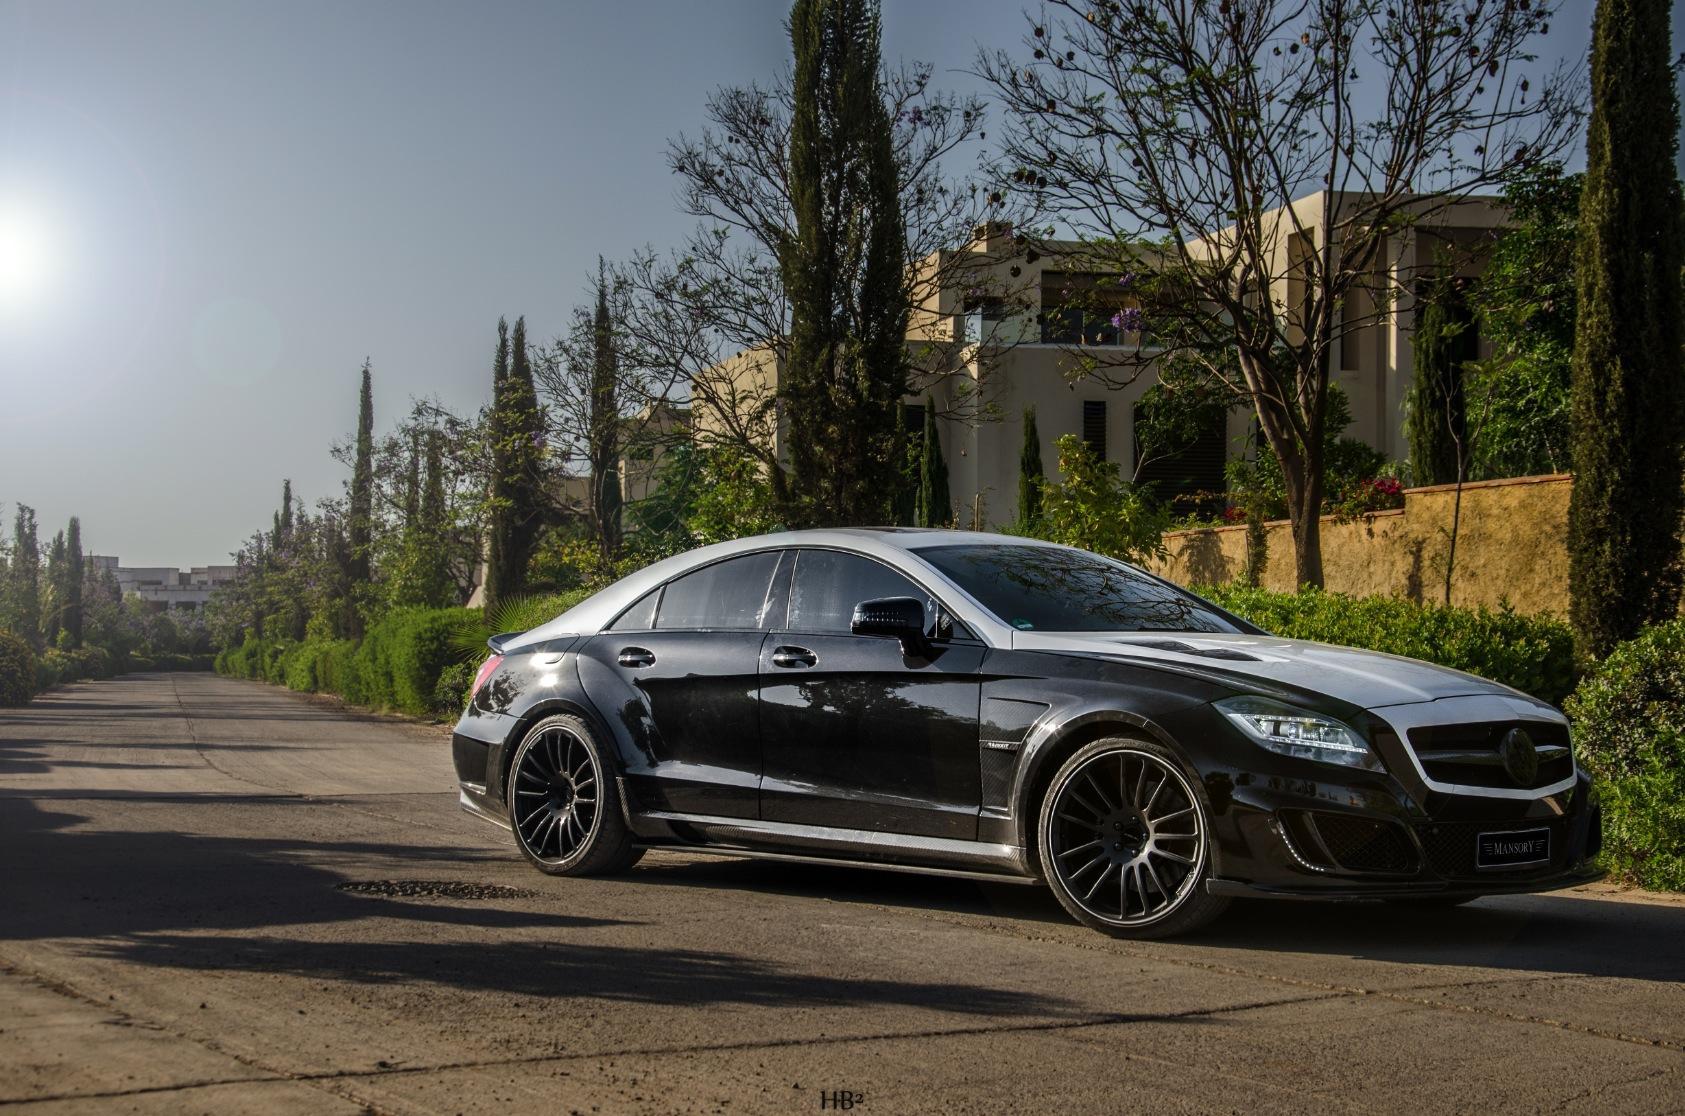 Mansory body kit for Mercedes-Benz CLS carbon